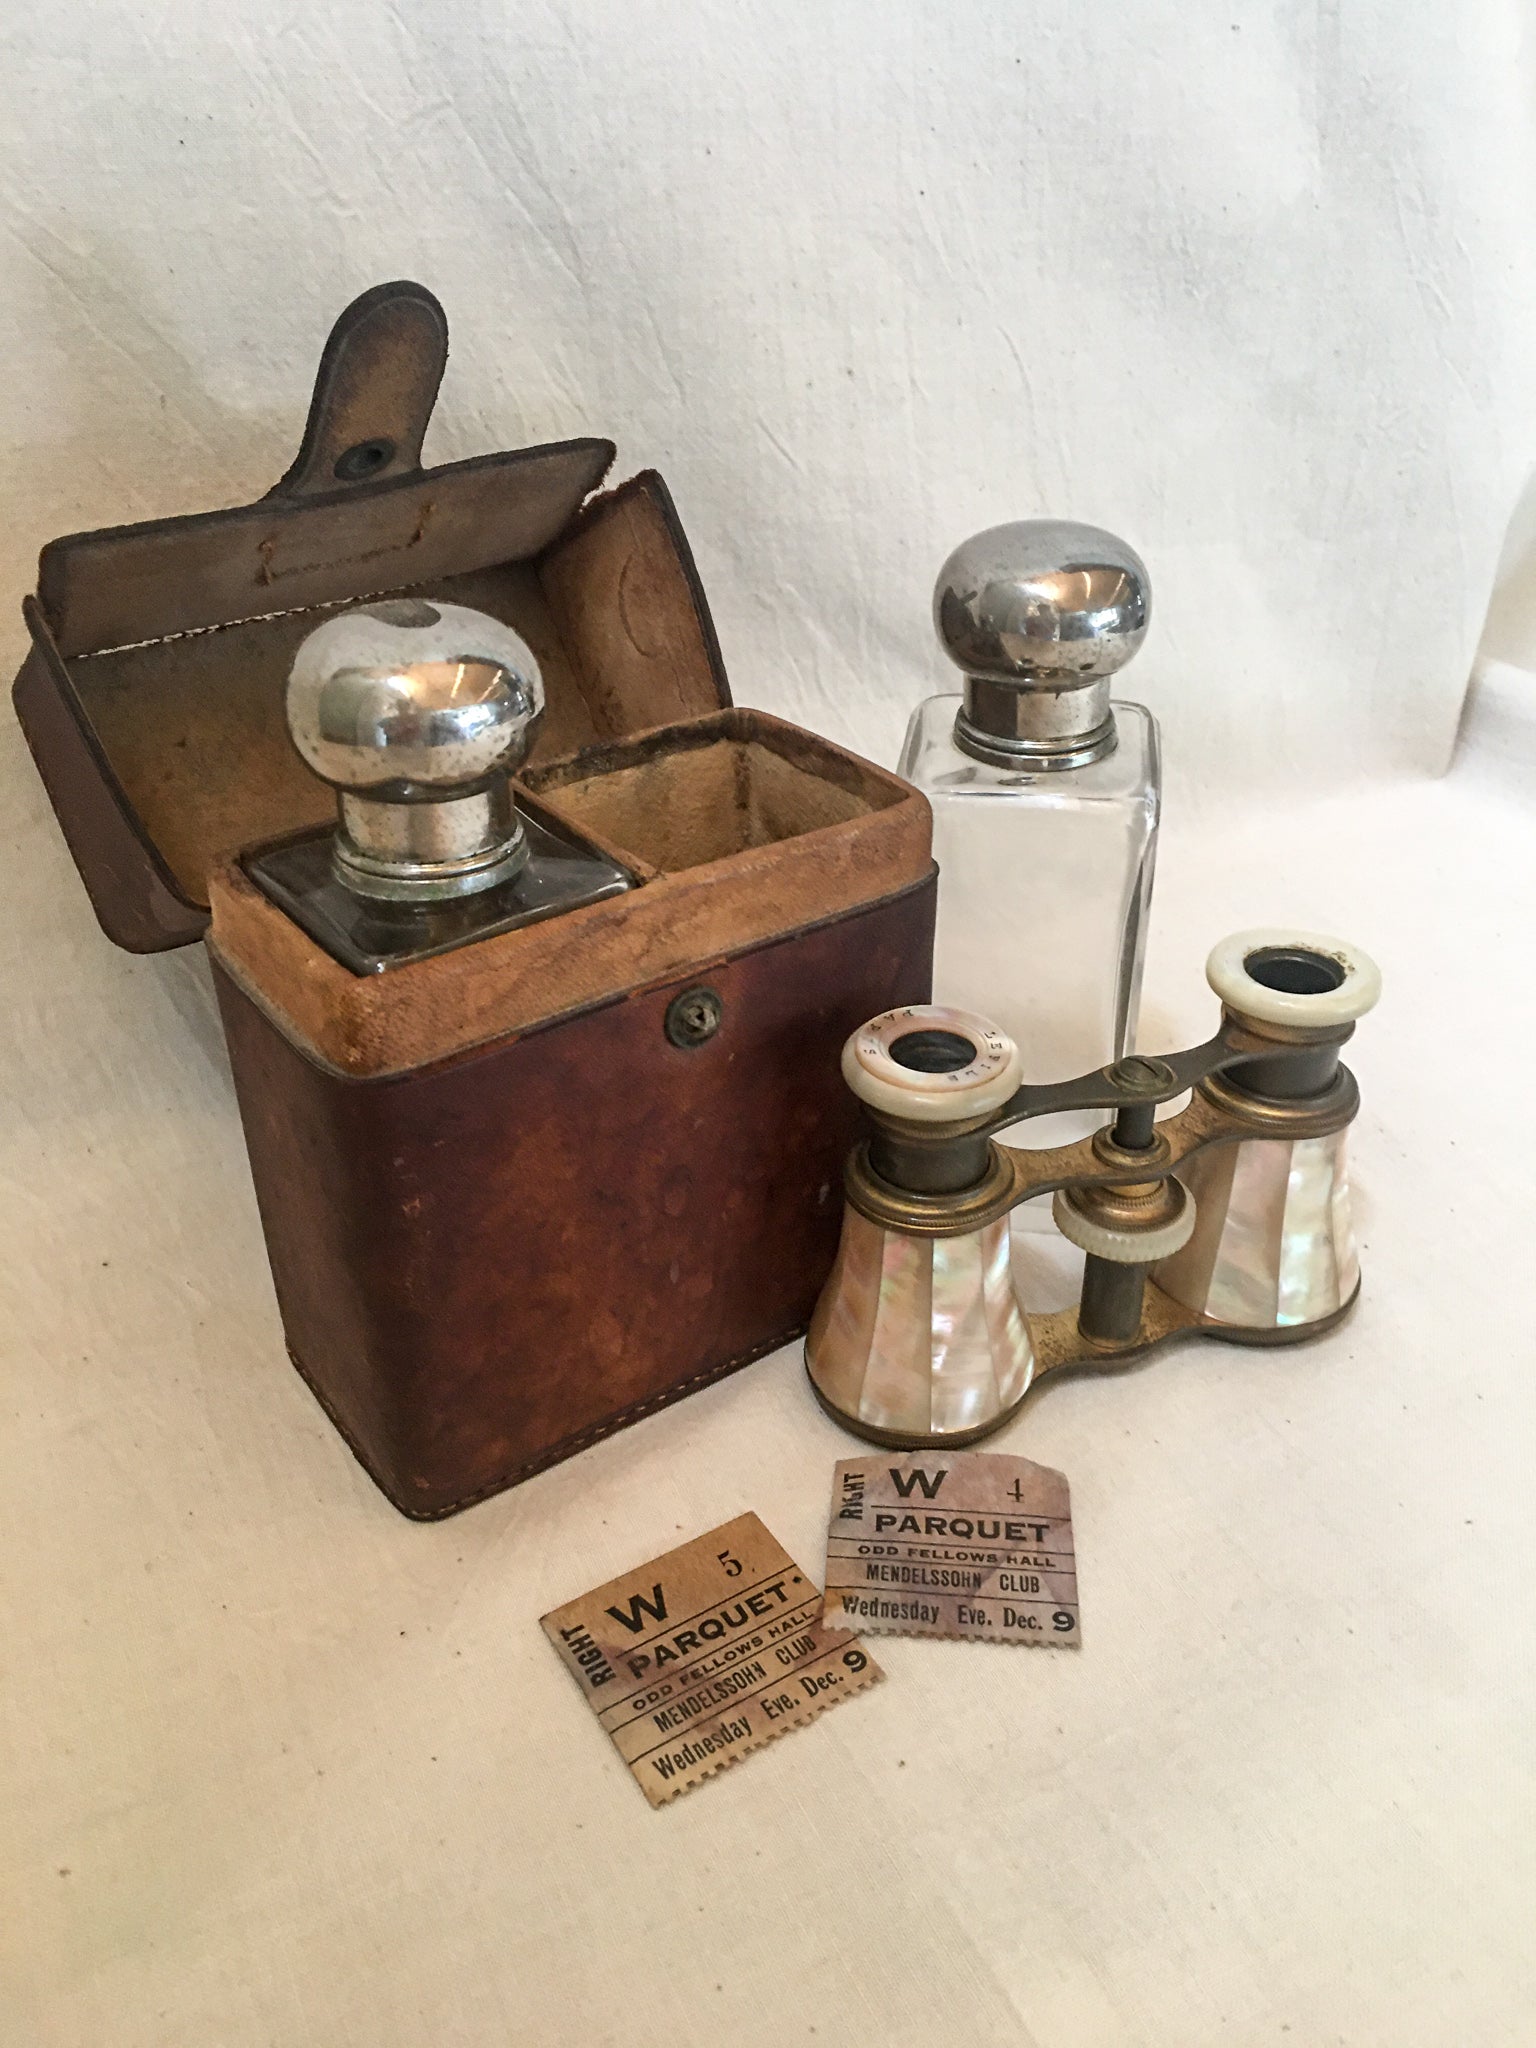 A Night Out: 1920’s Medicine Bottles with Silver Tops, in a Leather Travel Case AND 1910’s LeFils Paris Mother of Pearl Opera Glasses